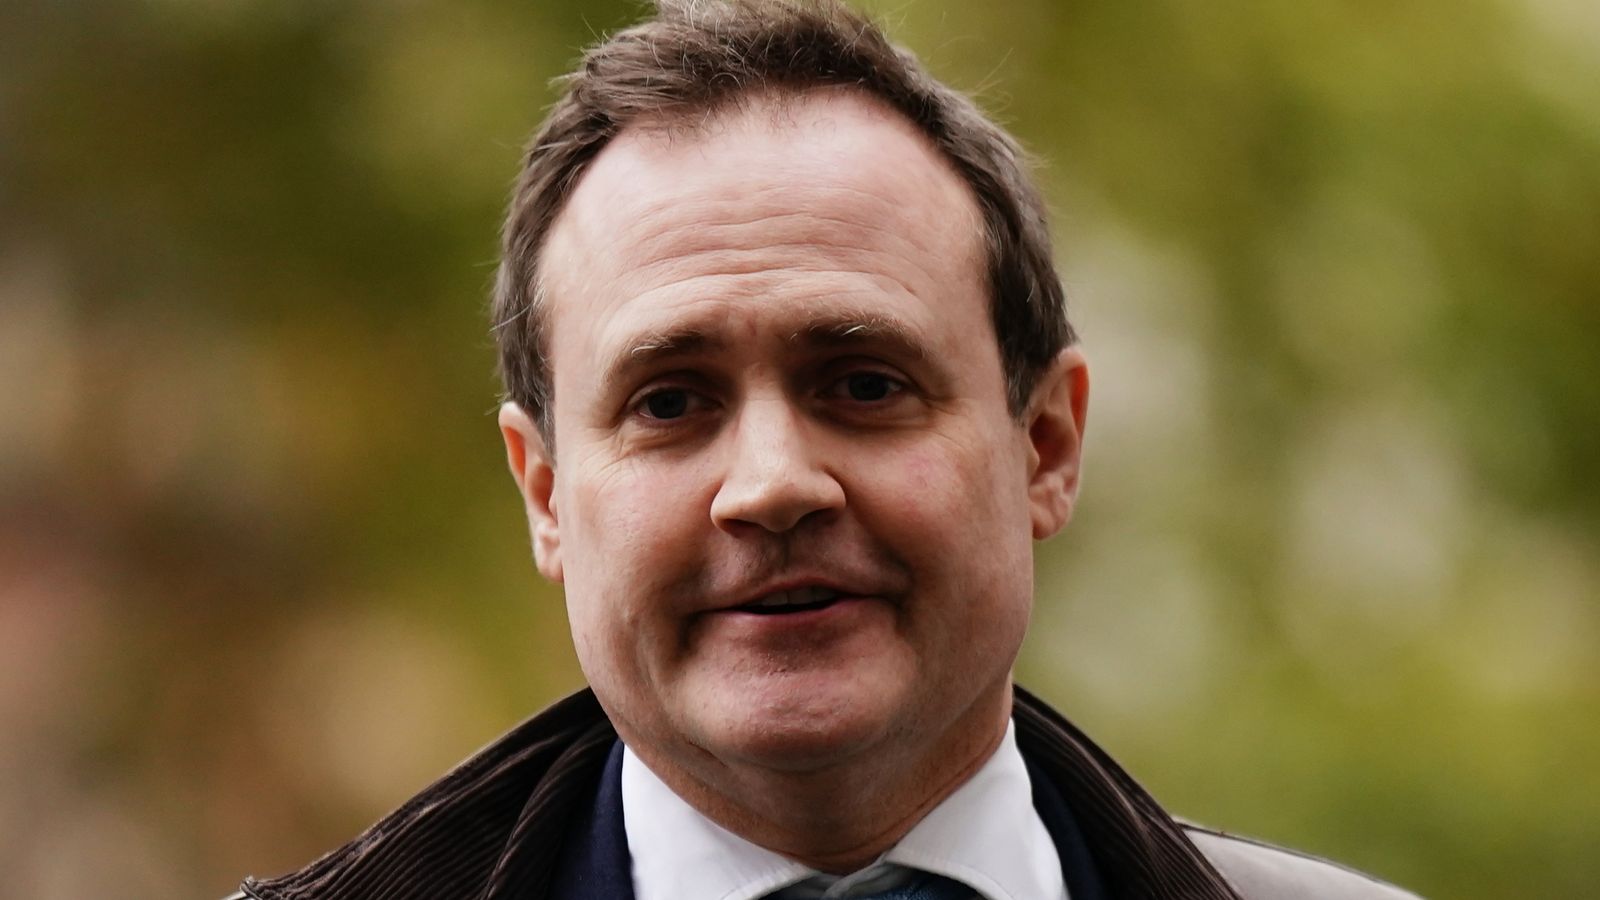 Security minister Tom Tugendhat banned from driving for six months after being caught using phone behind wheel